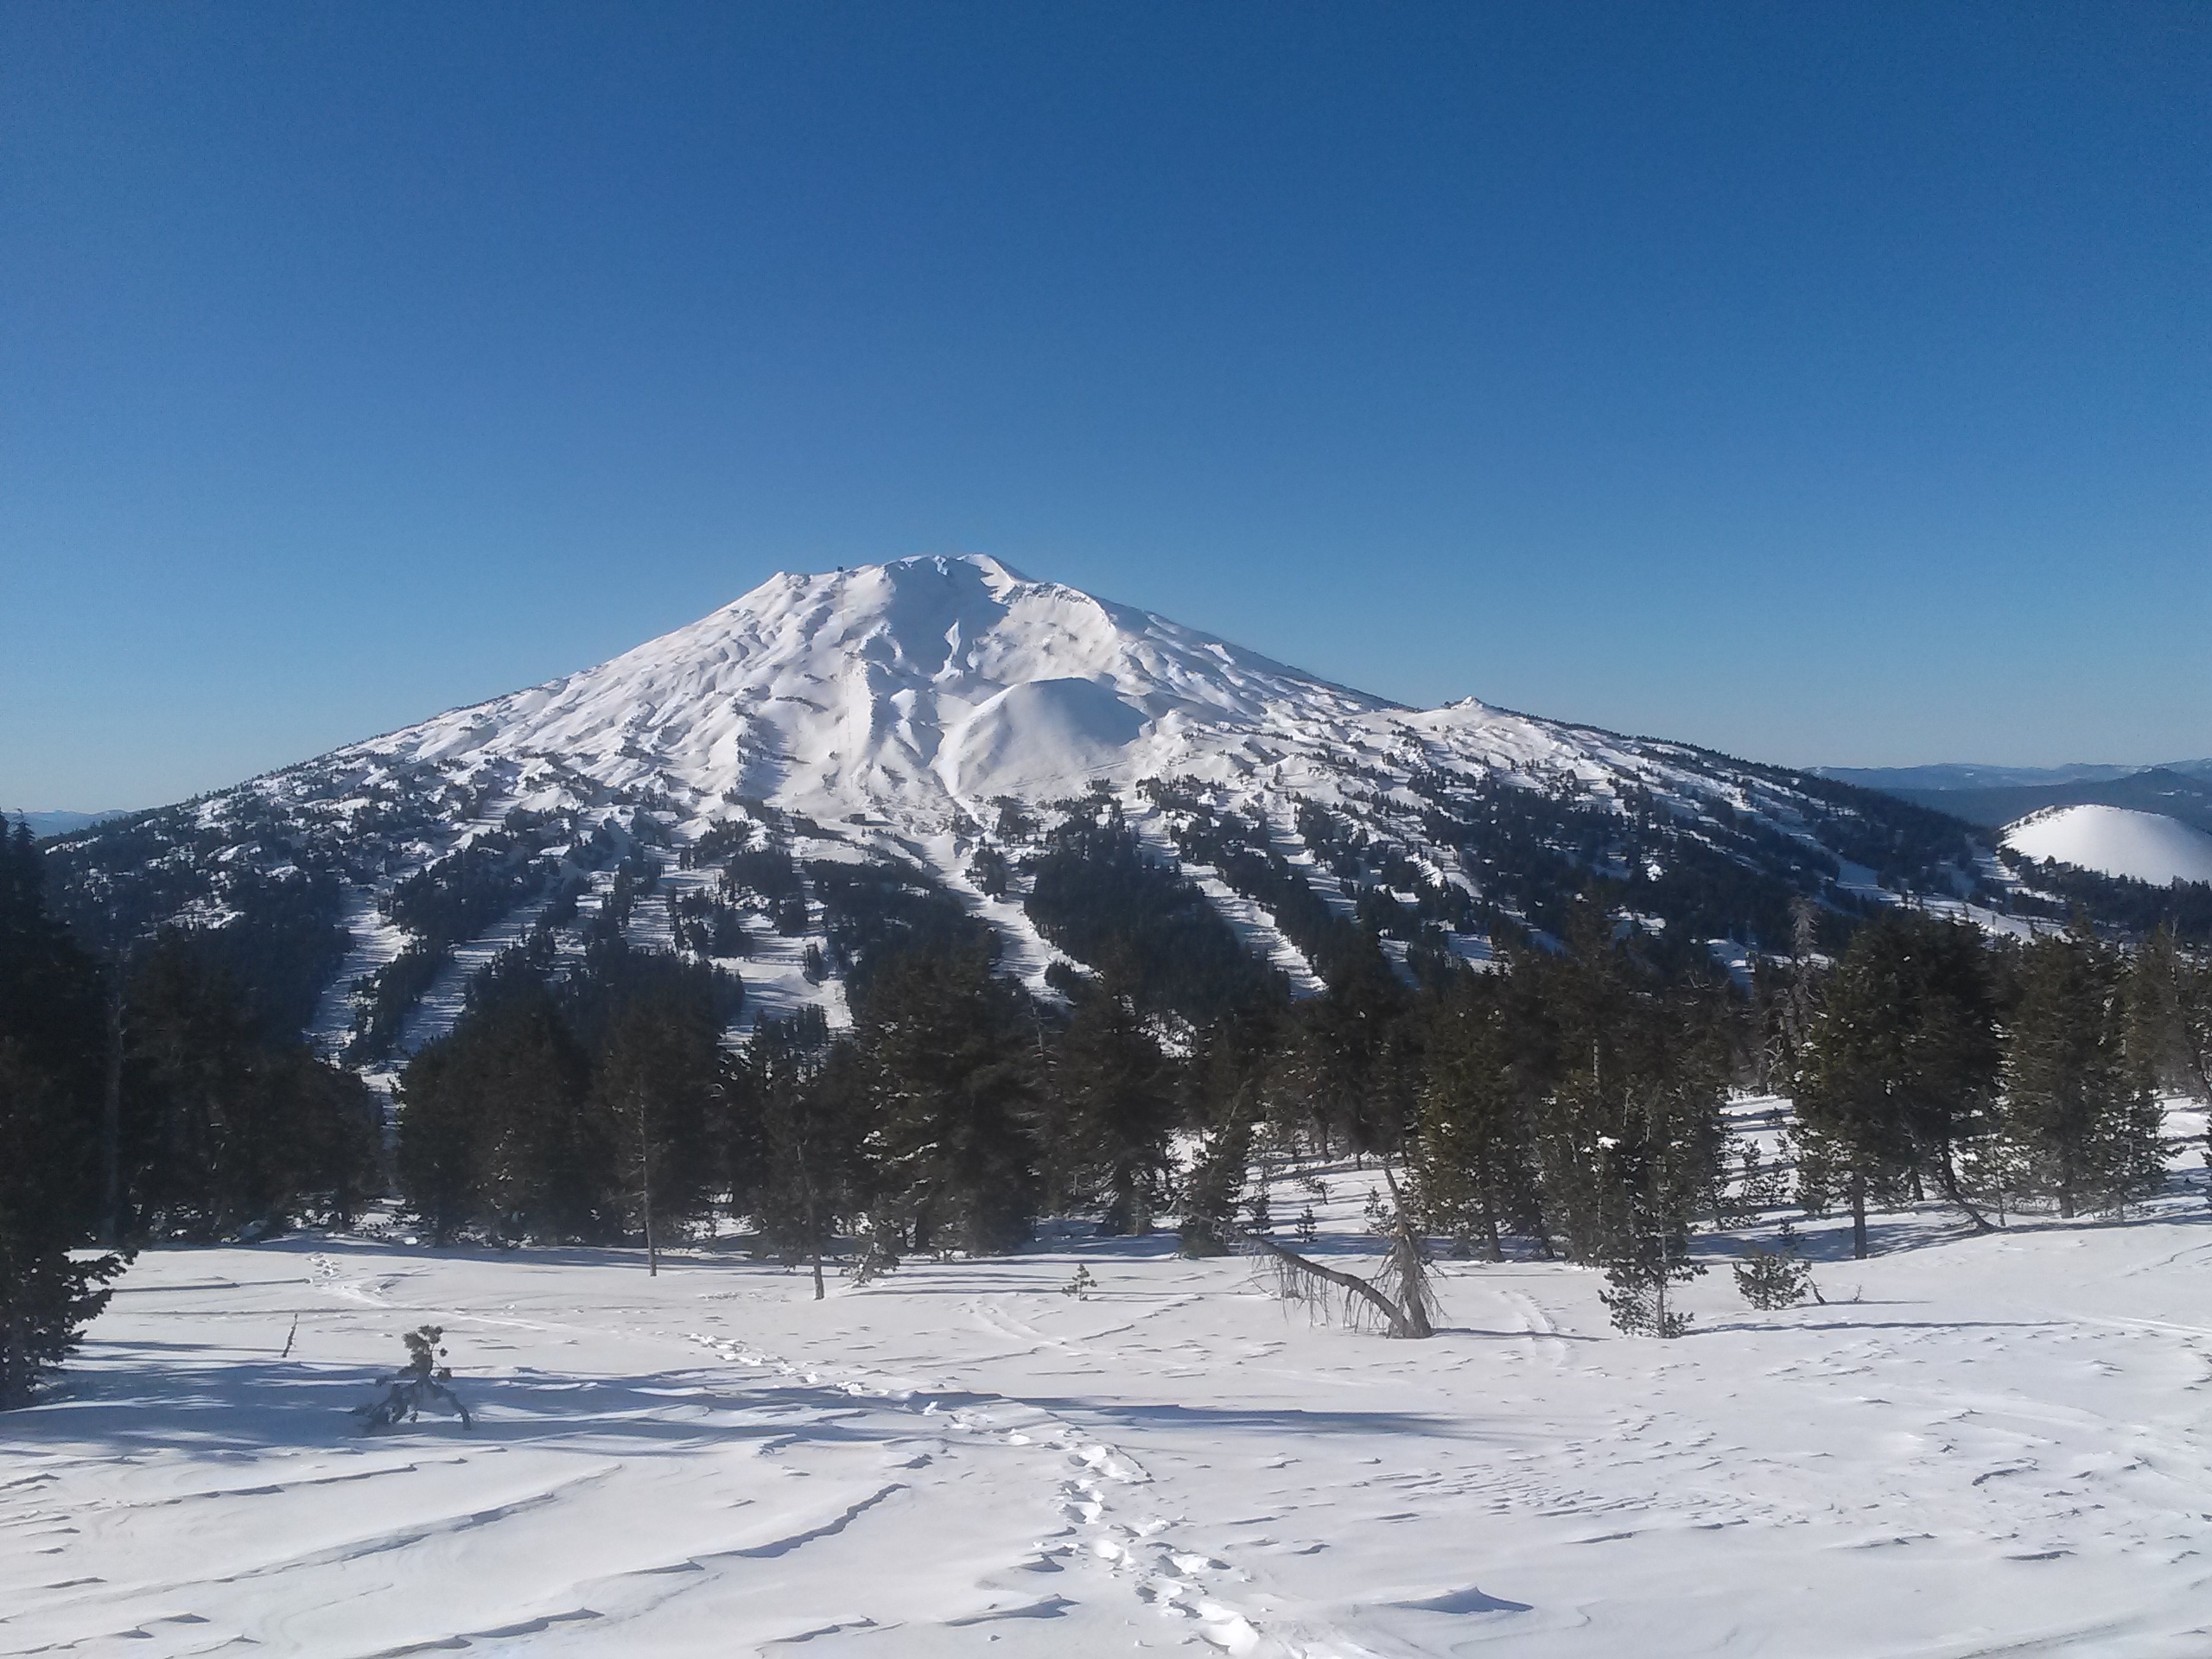 Mt. Bachelor from the top of Tumalo Mountain today.